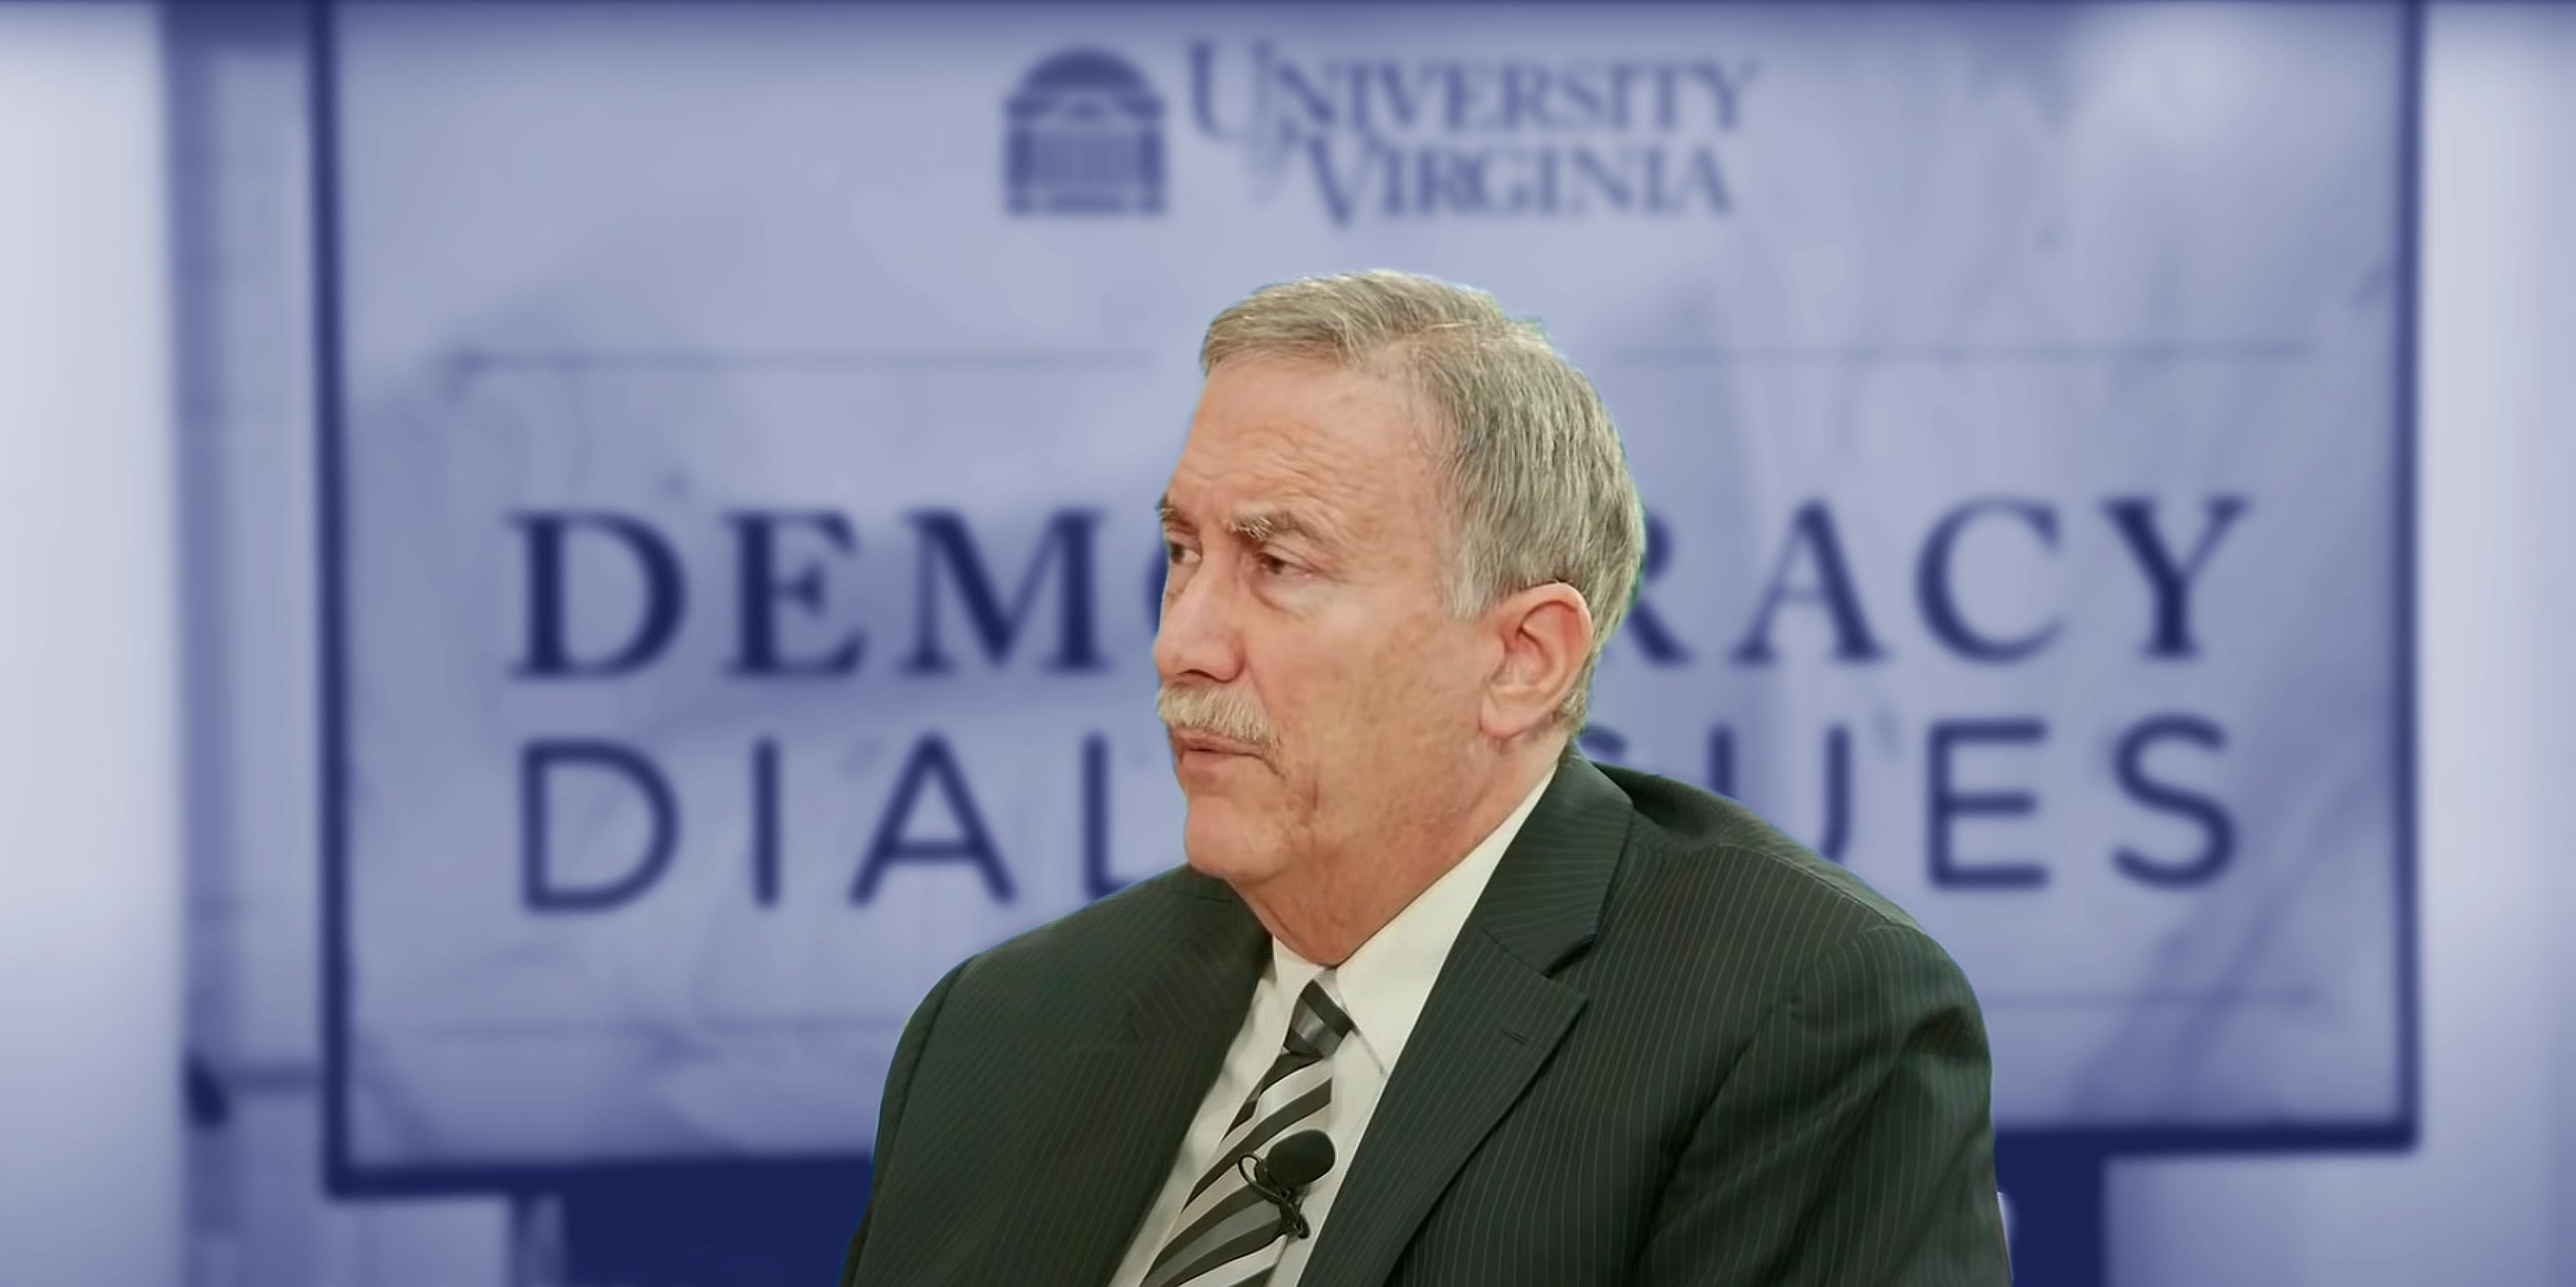 Larry Sabato hosting the first Democracy Dialogues